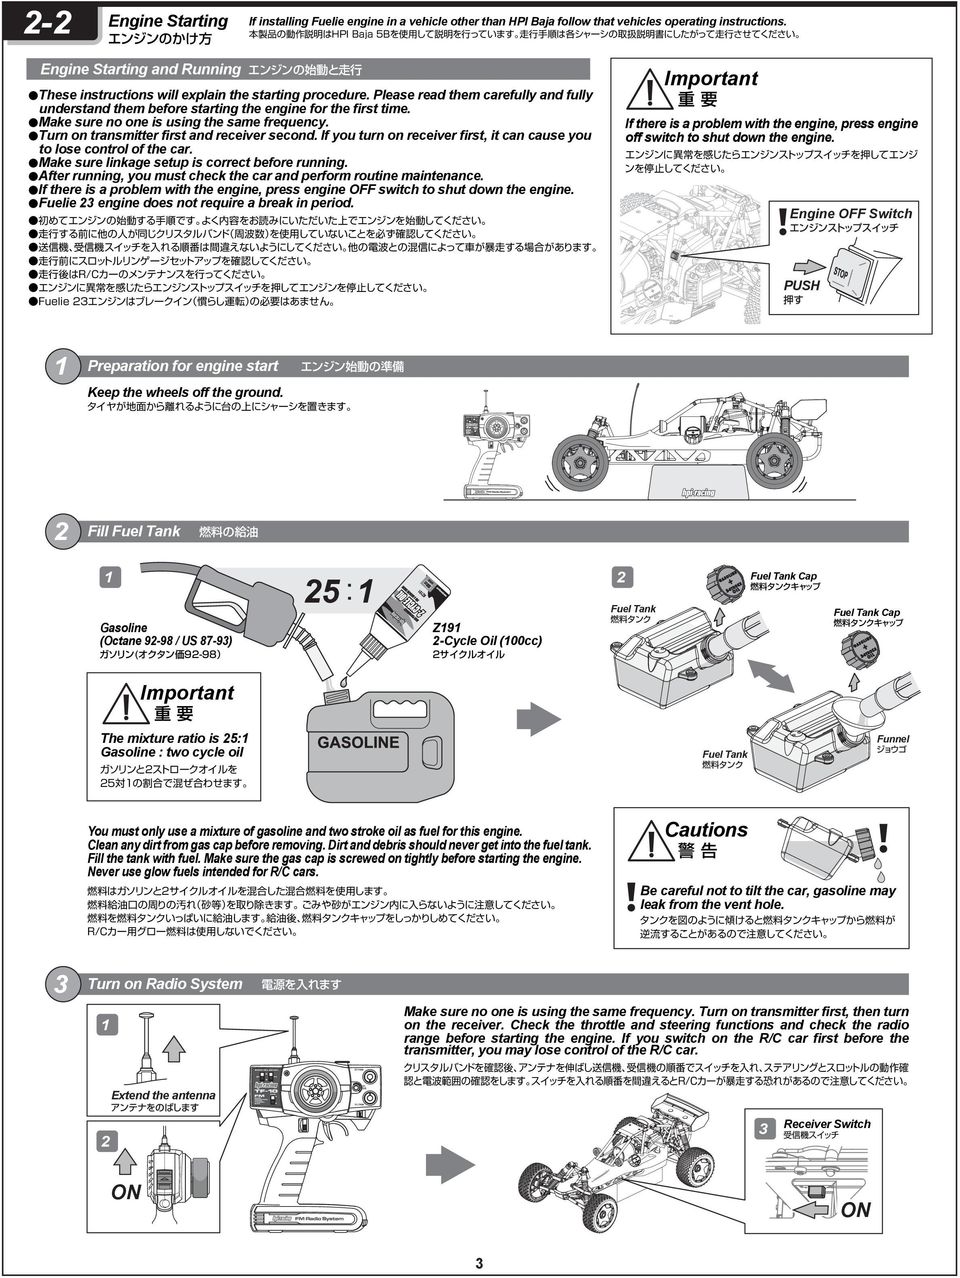 Please read them carefully and fully understand them before starting the engine for the first time. Make sure no one is using the same frequency. Turn on transmitter first and receiver second.